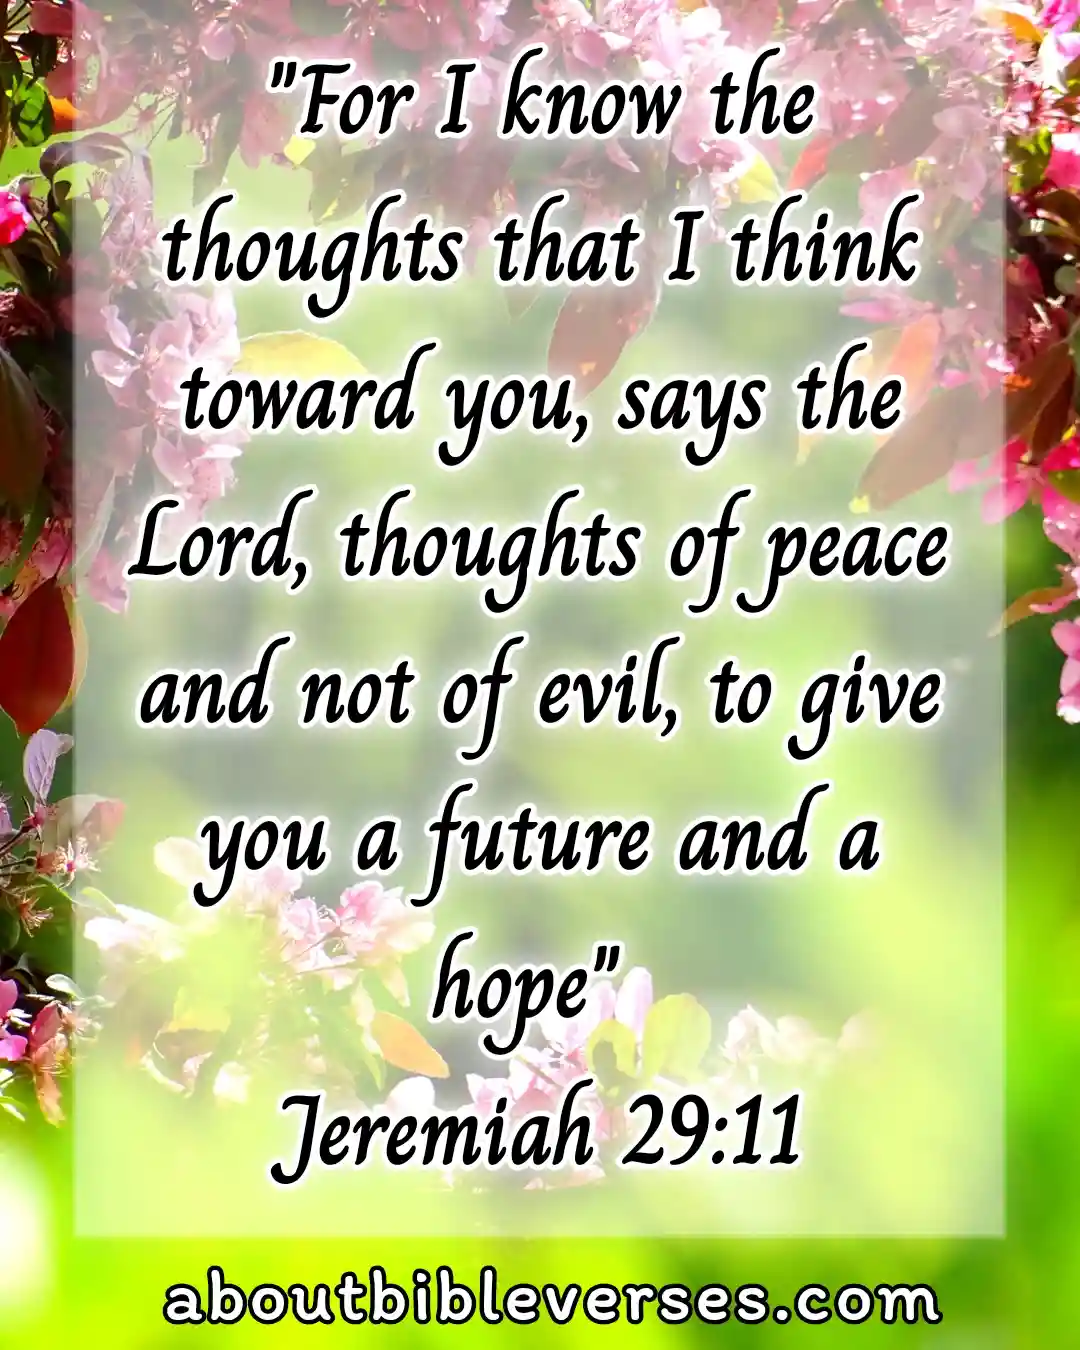 Bible verse about hope for the future (Jeremiah 29:11)